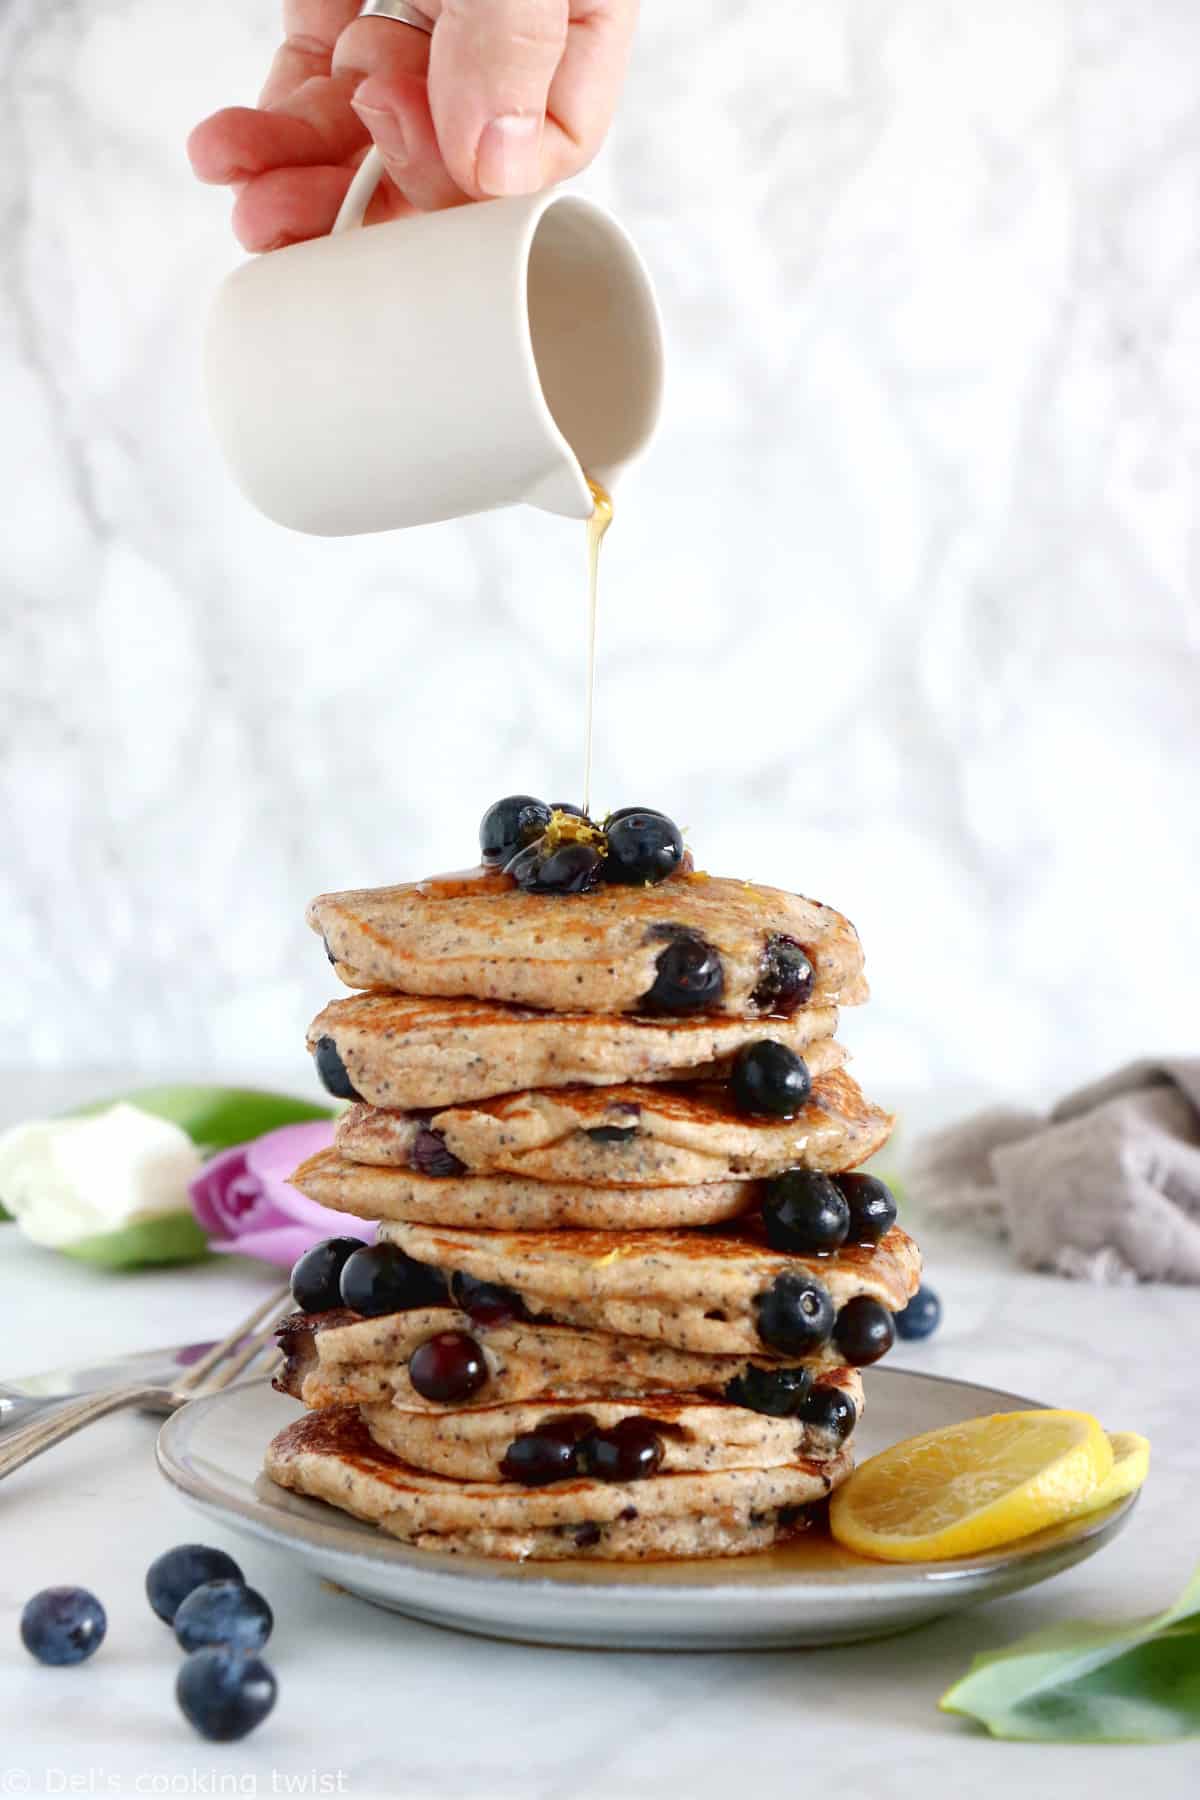 These lemon poppy seed blueberry pancakes are sugar-free, packed with fruits and prepared with whole-wheat flour.